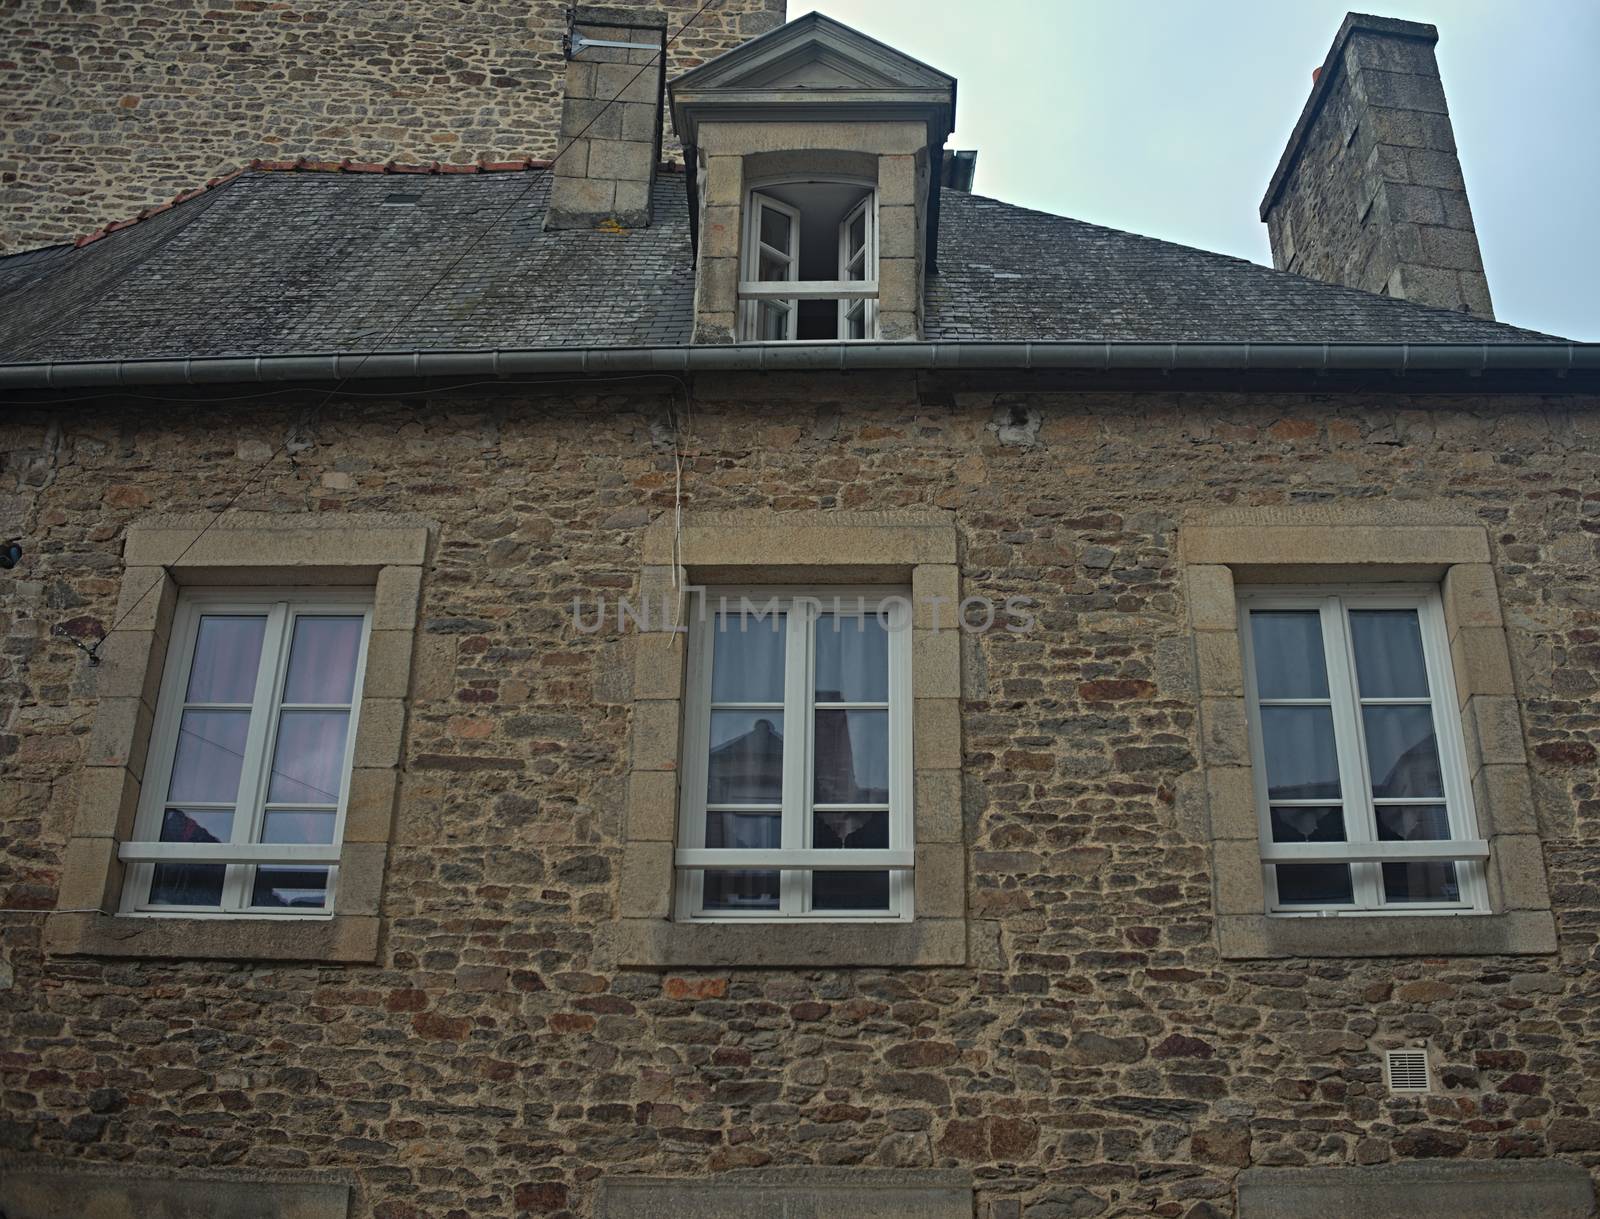 Traditional french stone building with many windows